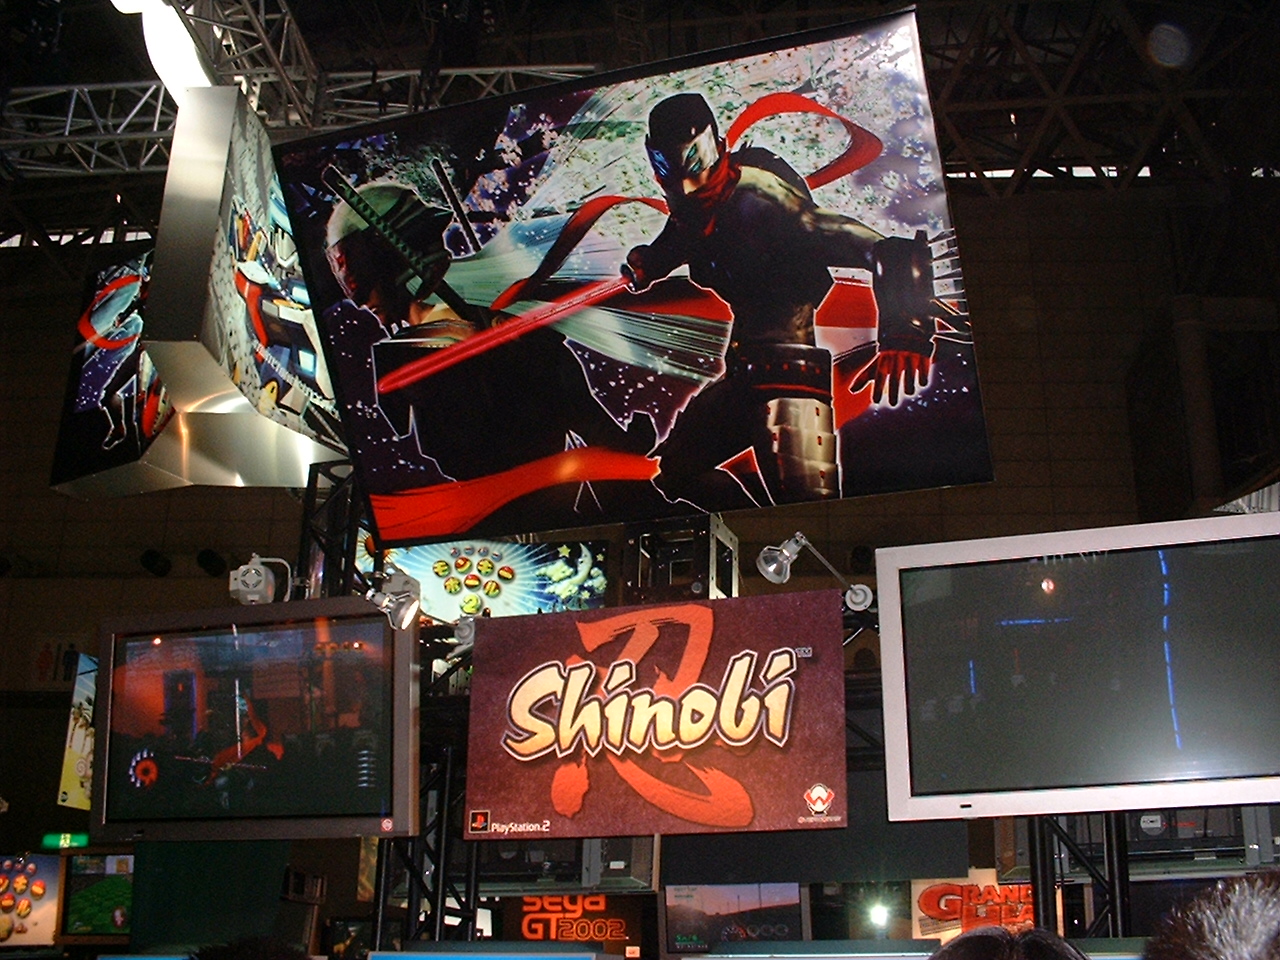 a giant poster of a ninja and the logo for shinobi with video screens